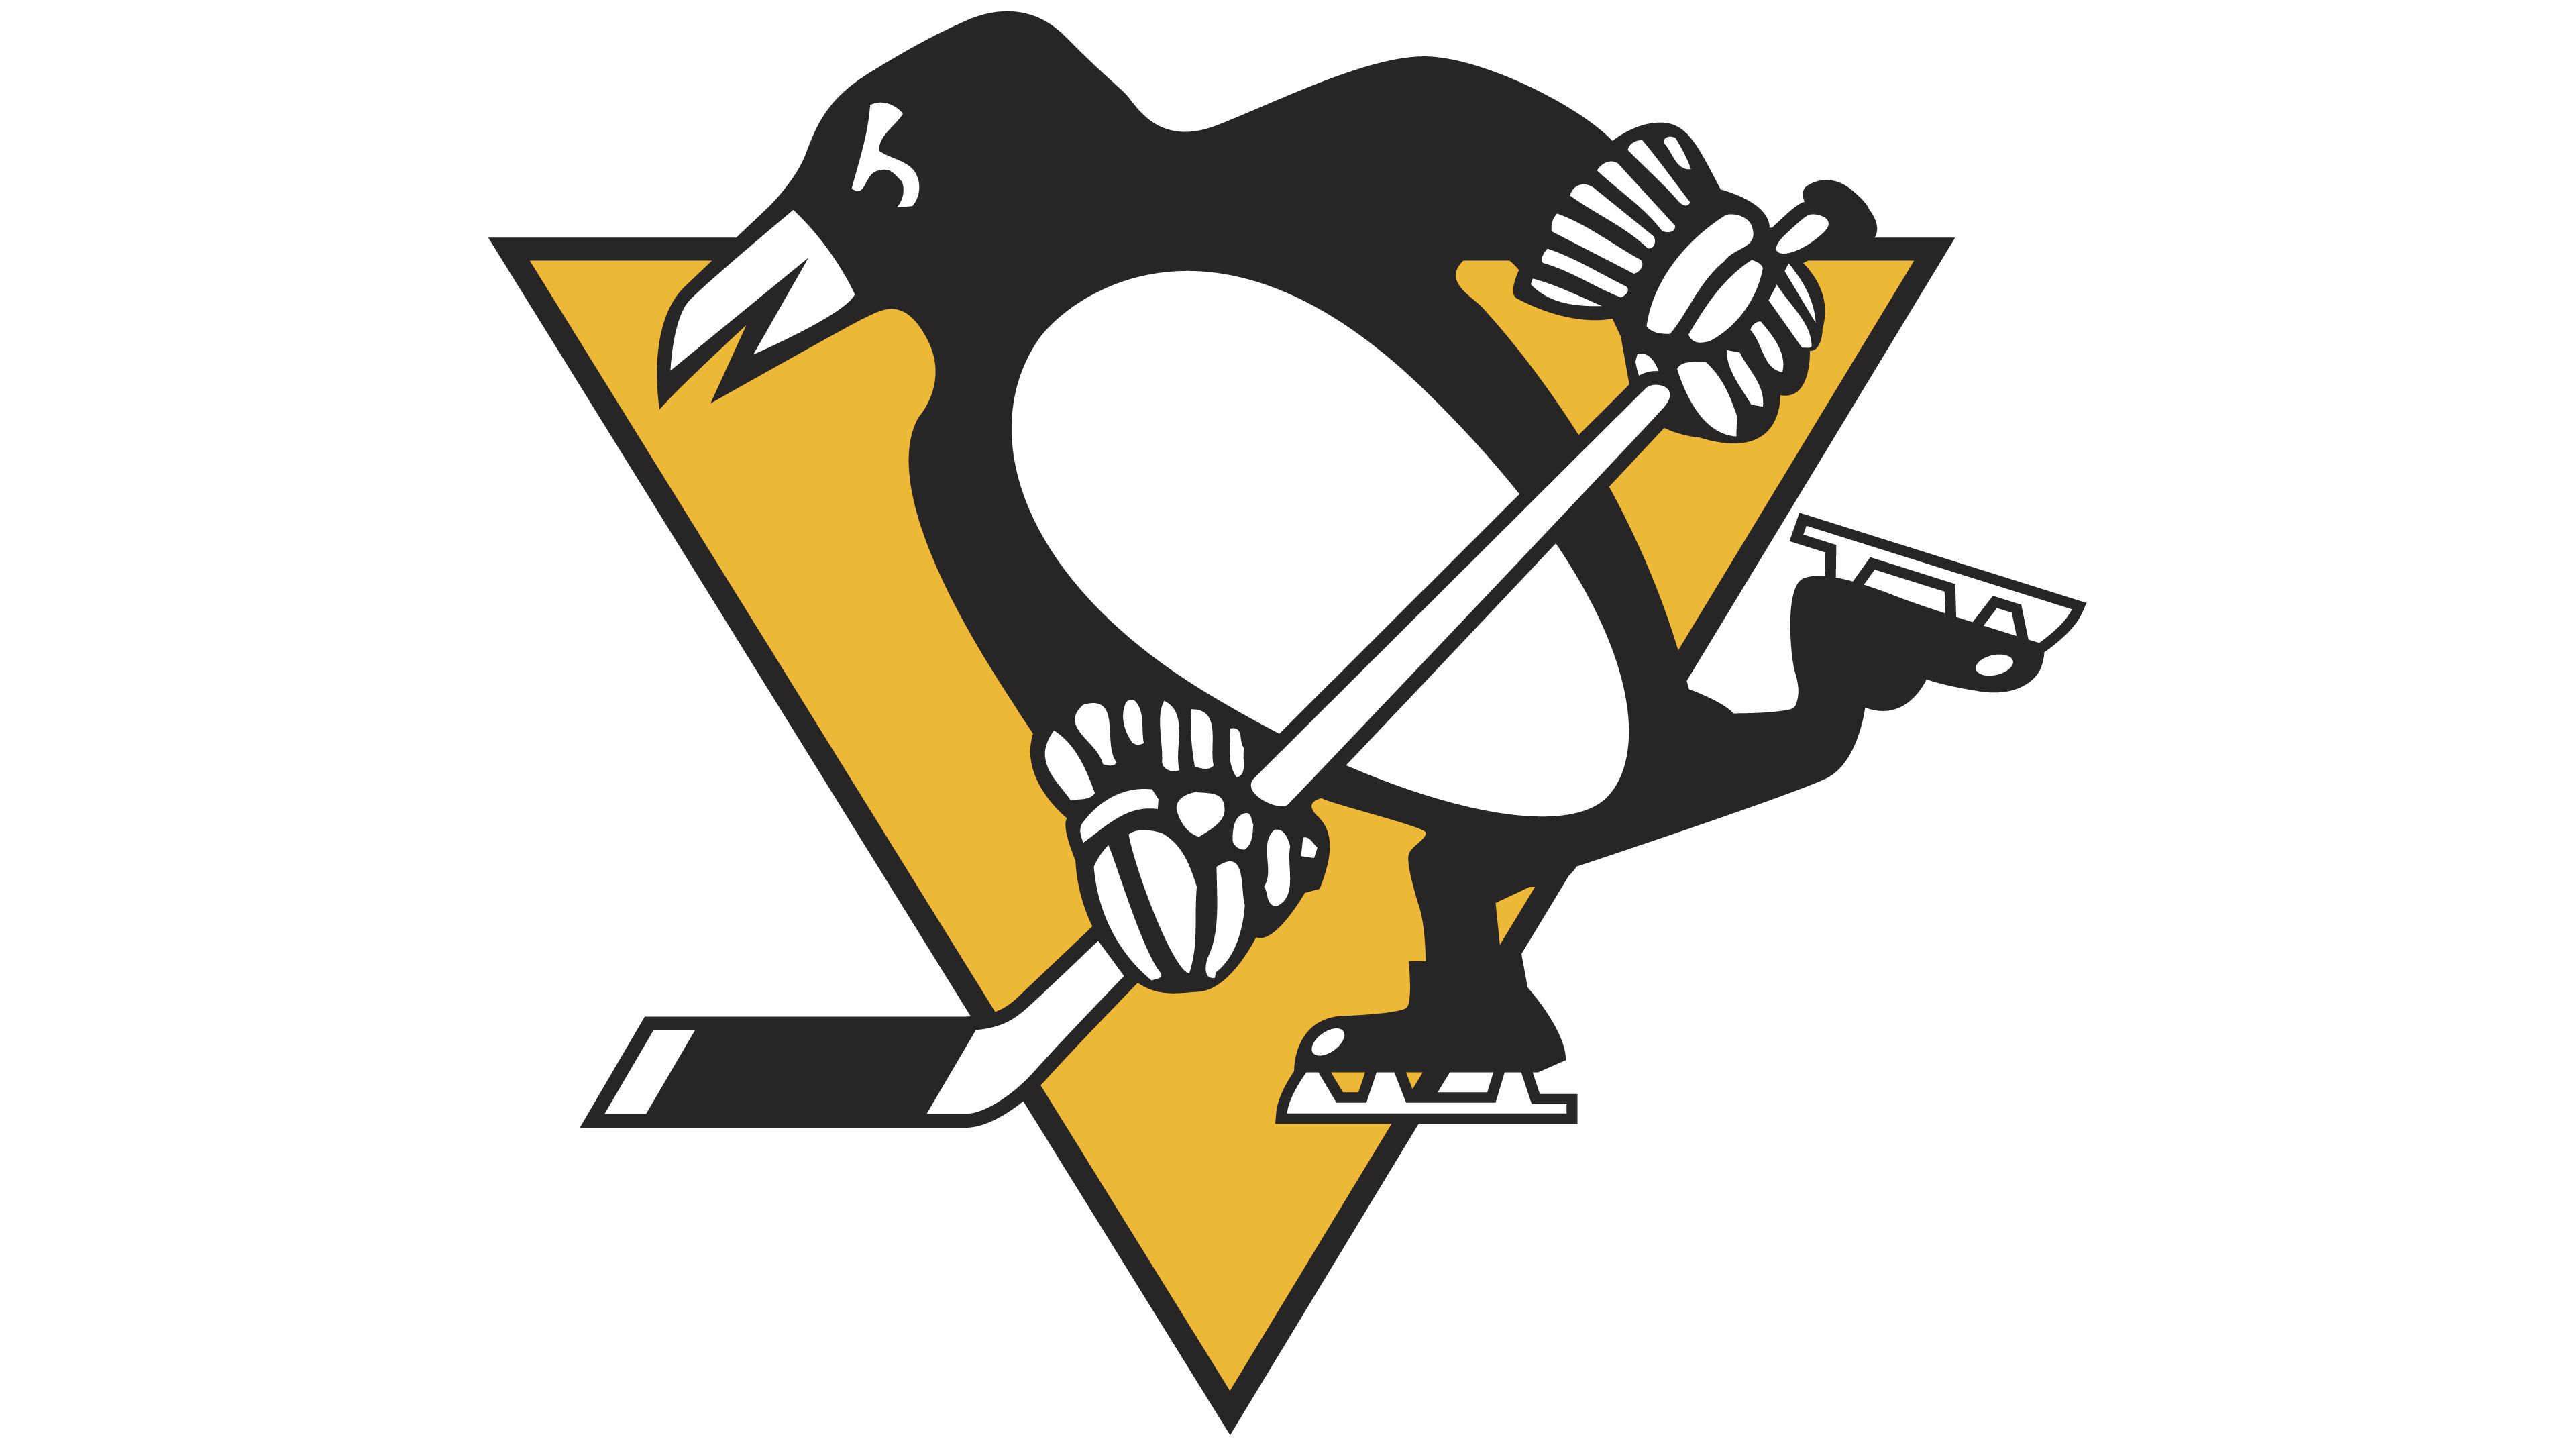 Pittsburgh Logo - Pittsburgh Penguins logo - Interesting History of the Team Name and ...